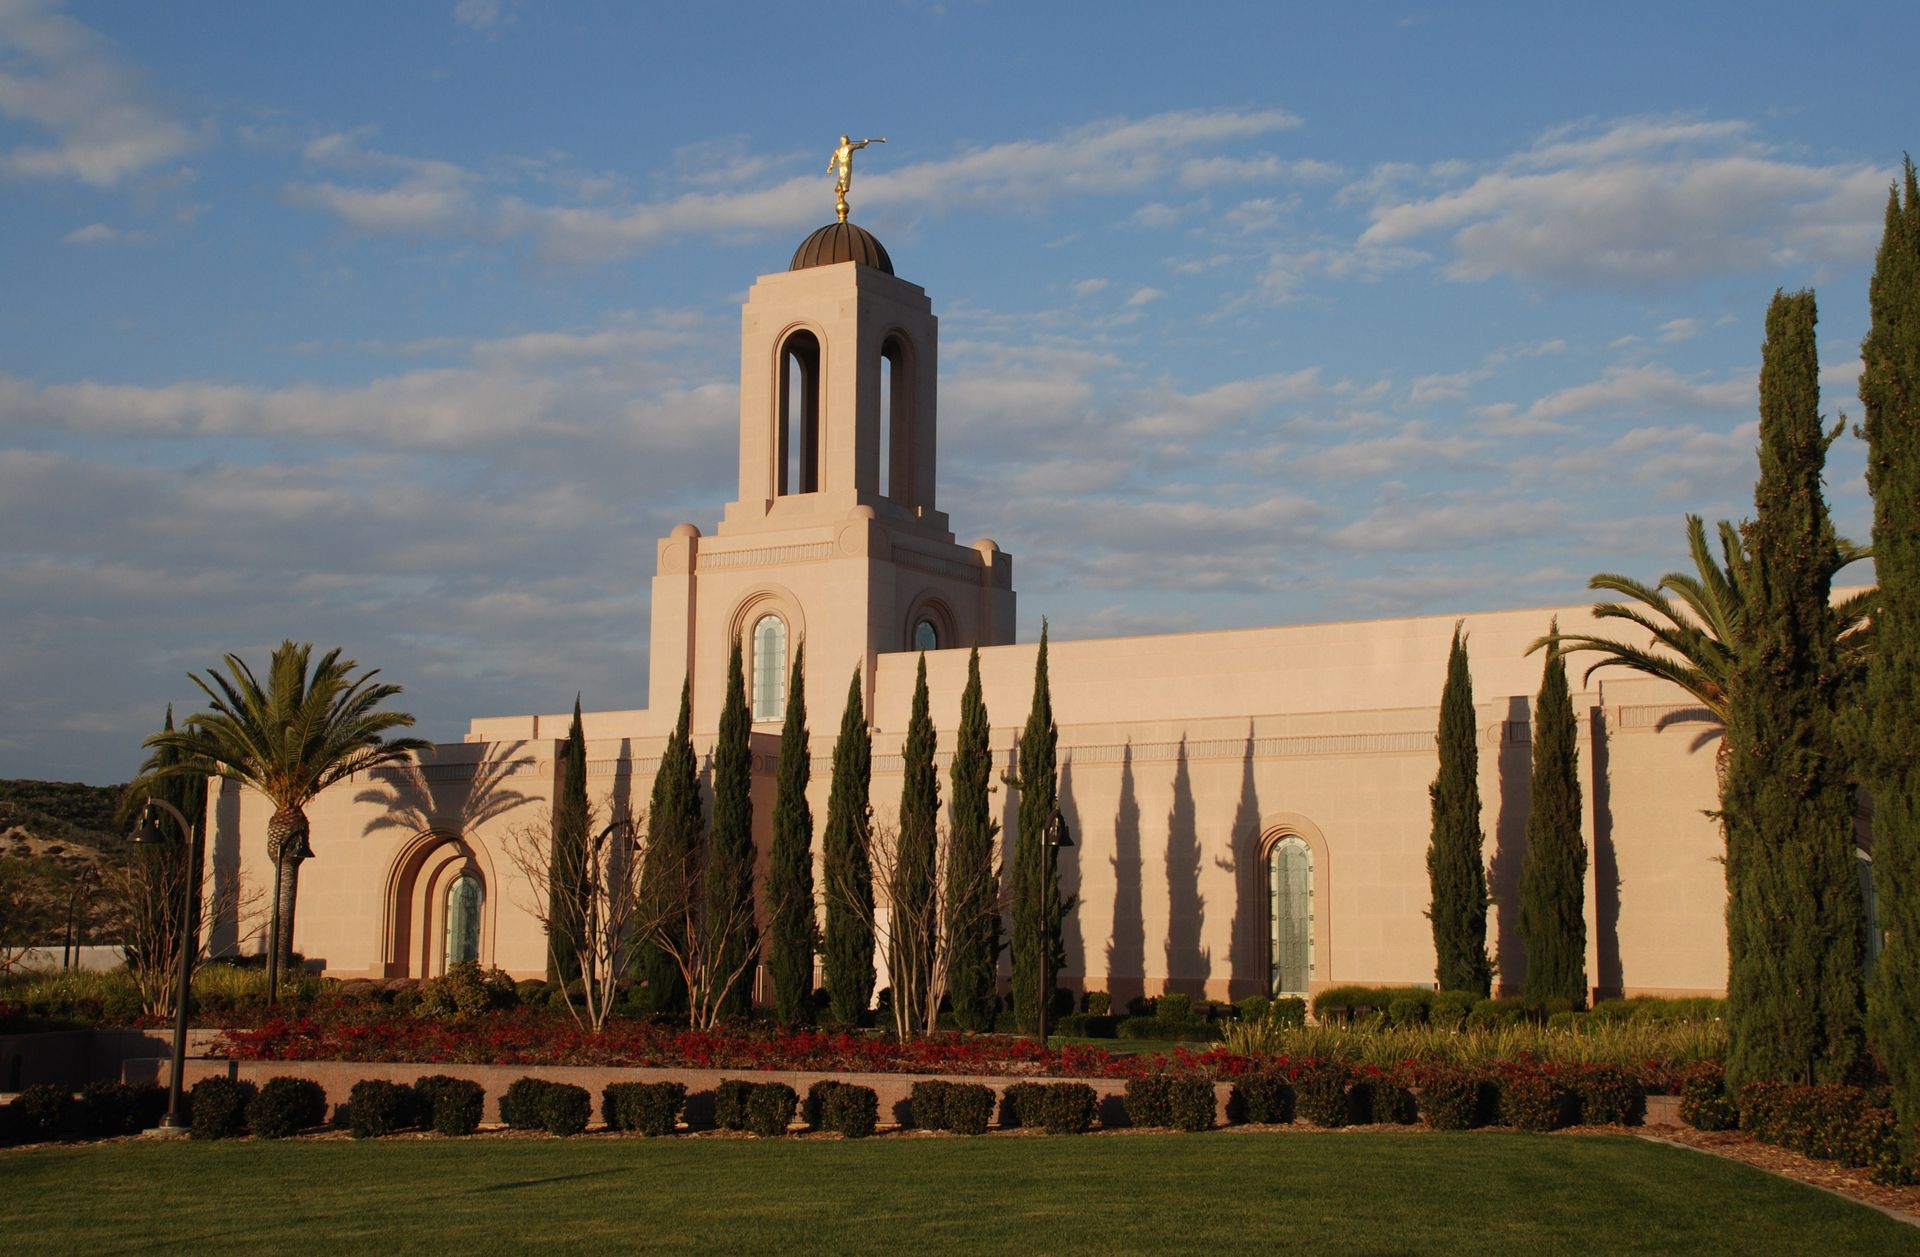 The Newport Beach California Temple at sunset, including scenery.